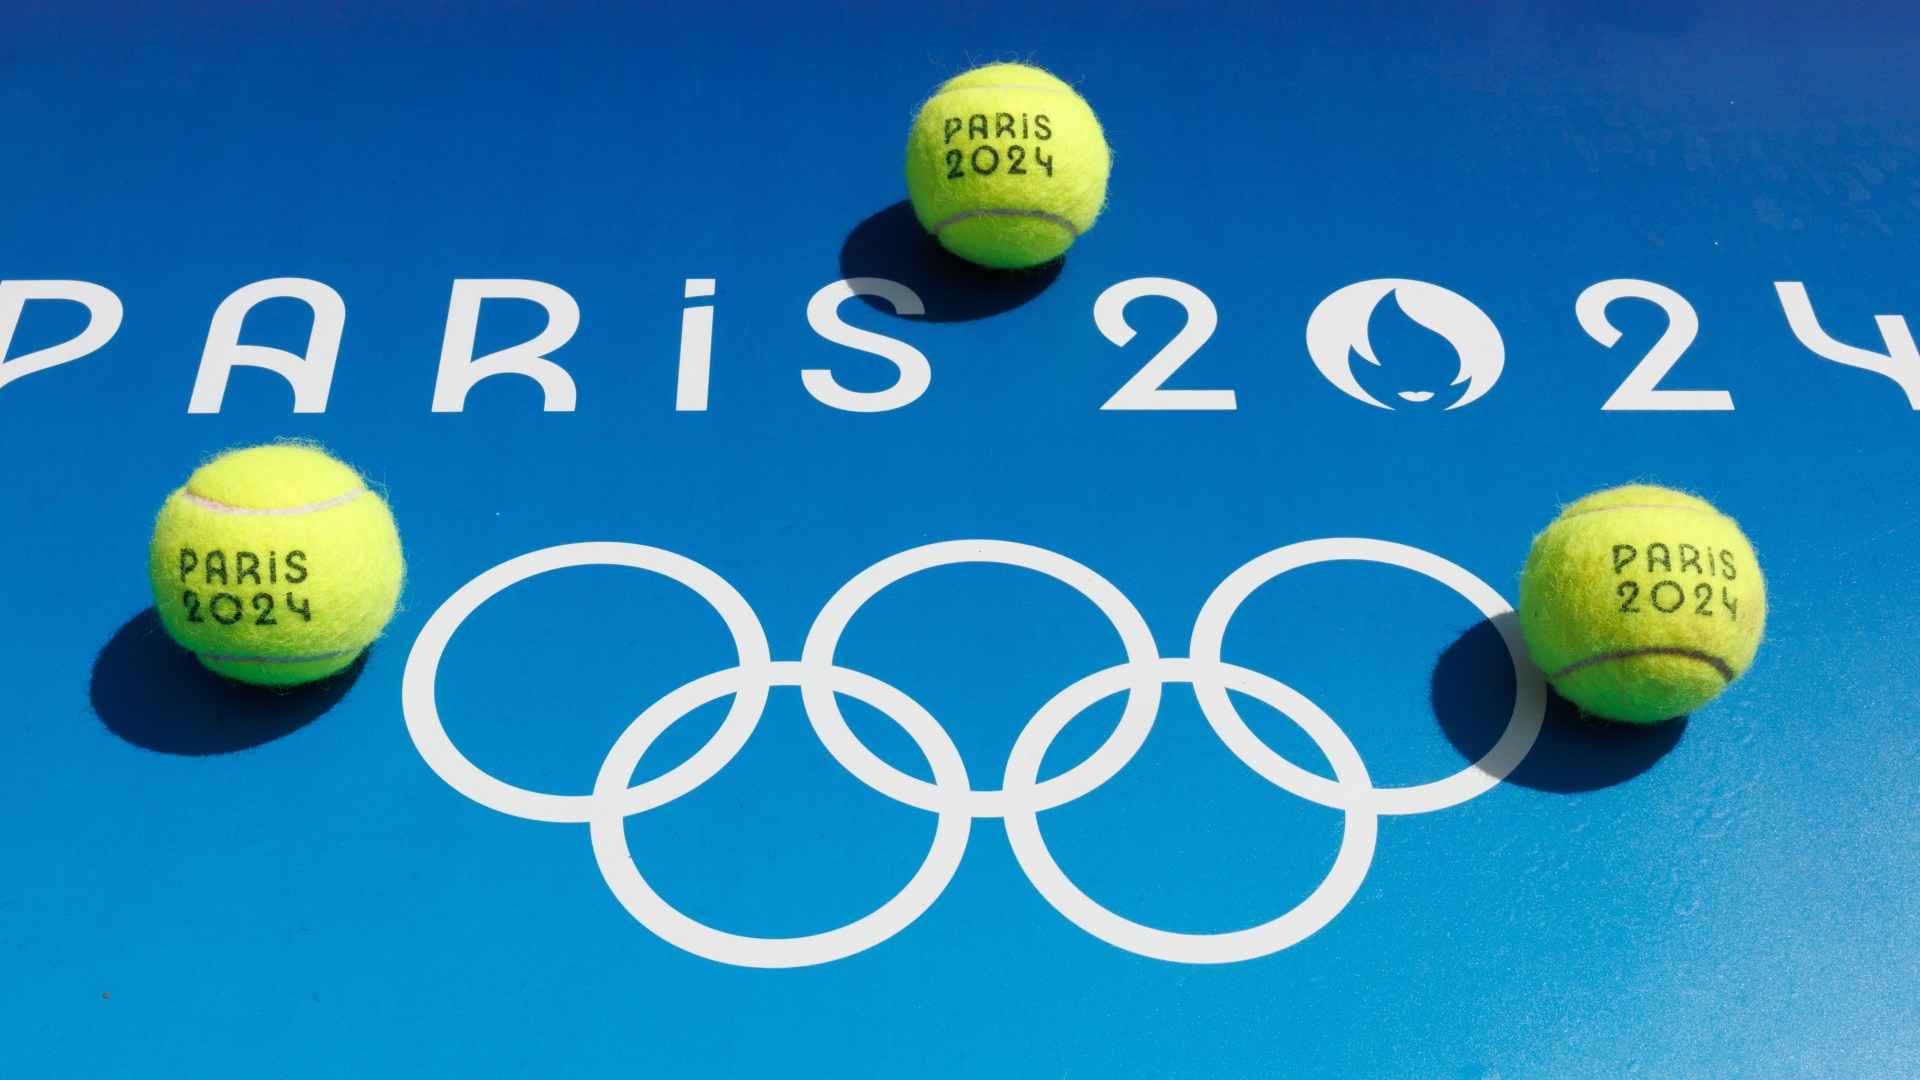 Paris 2024 Olympics tennis schedule: Dates, start times and results for huge event at iconic Summer Games [Video]